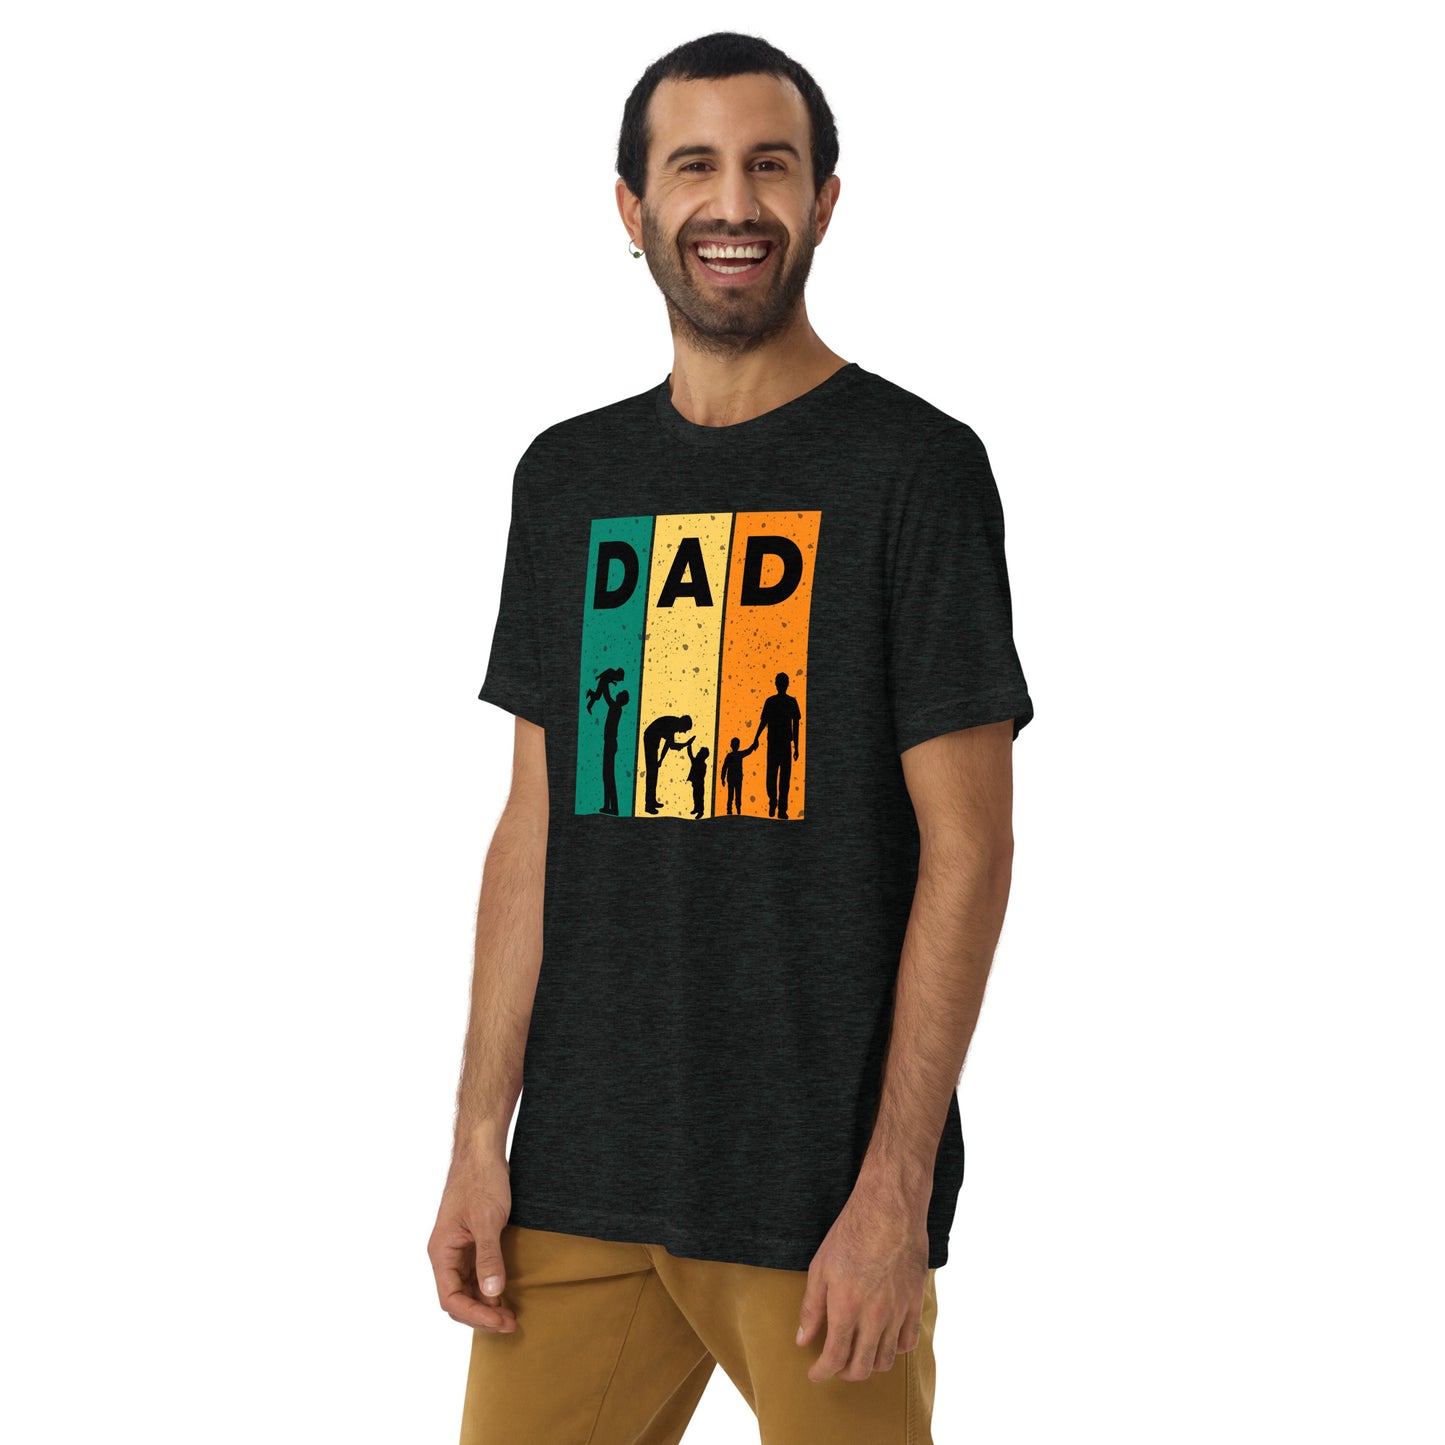 DAD Adult Unisex Retro Father's Day T-shirt